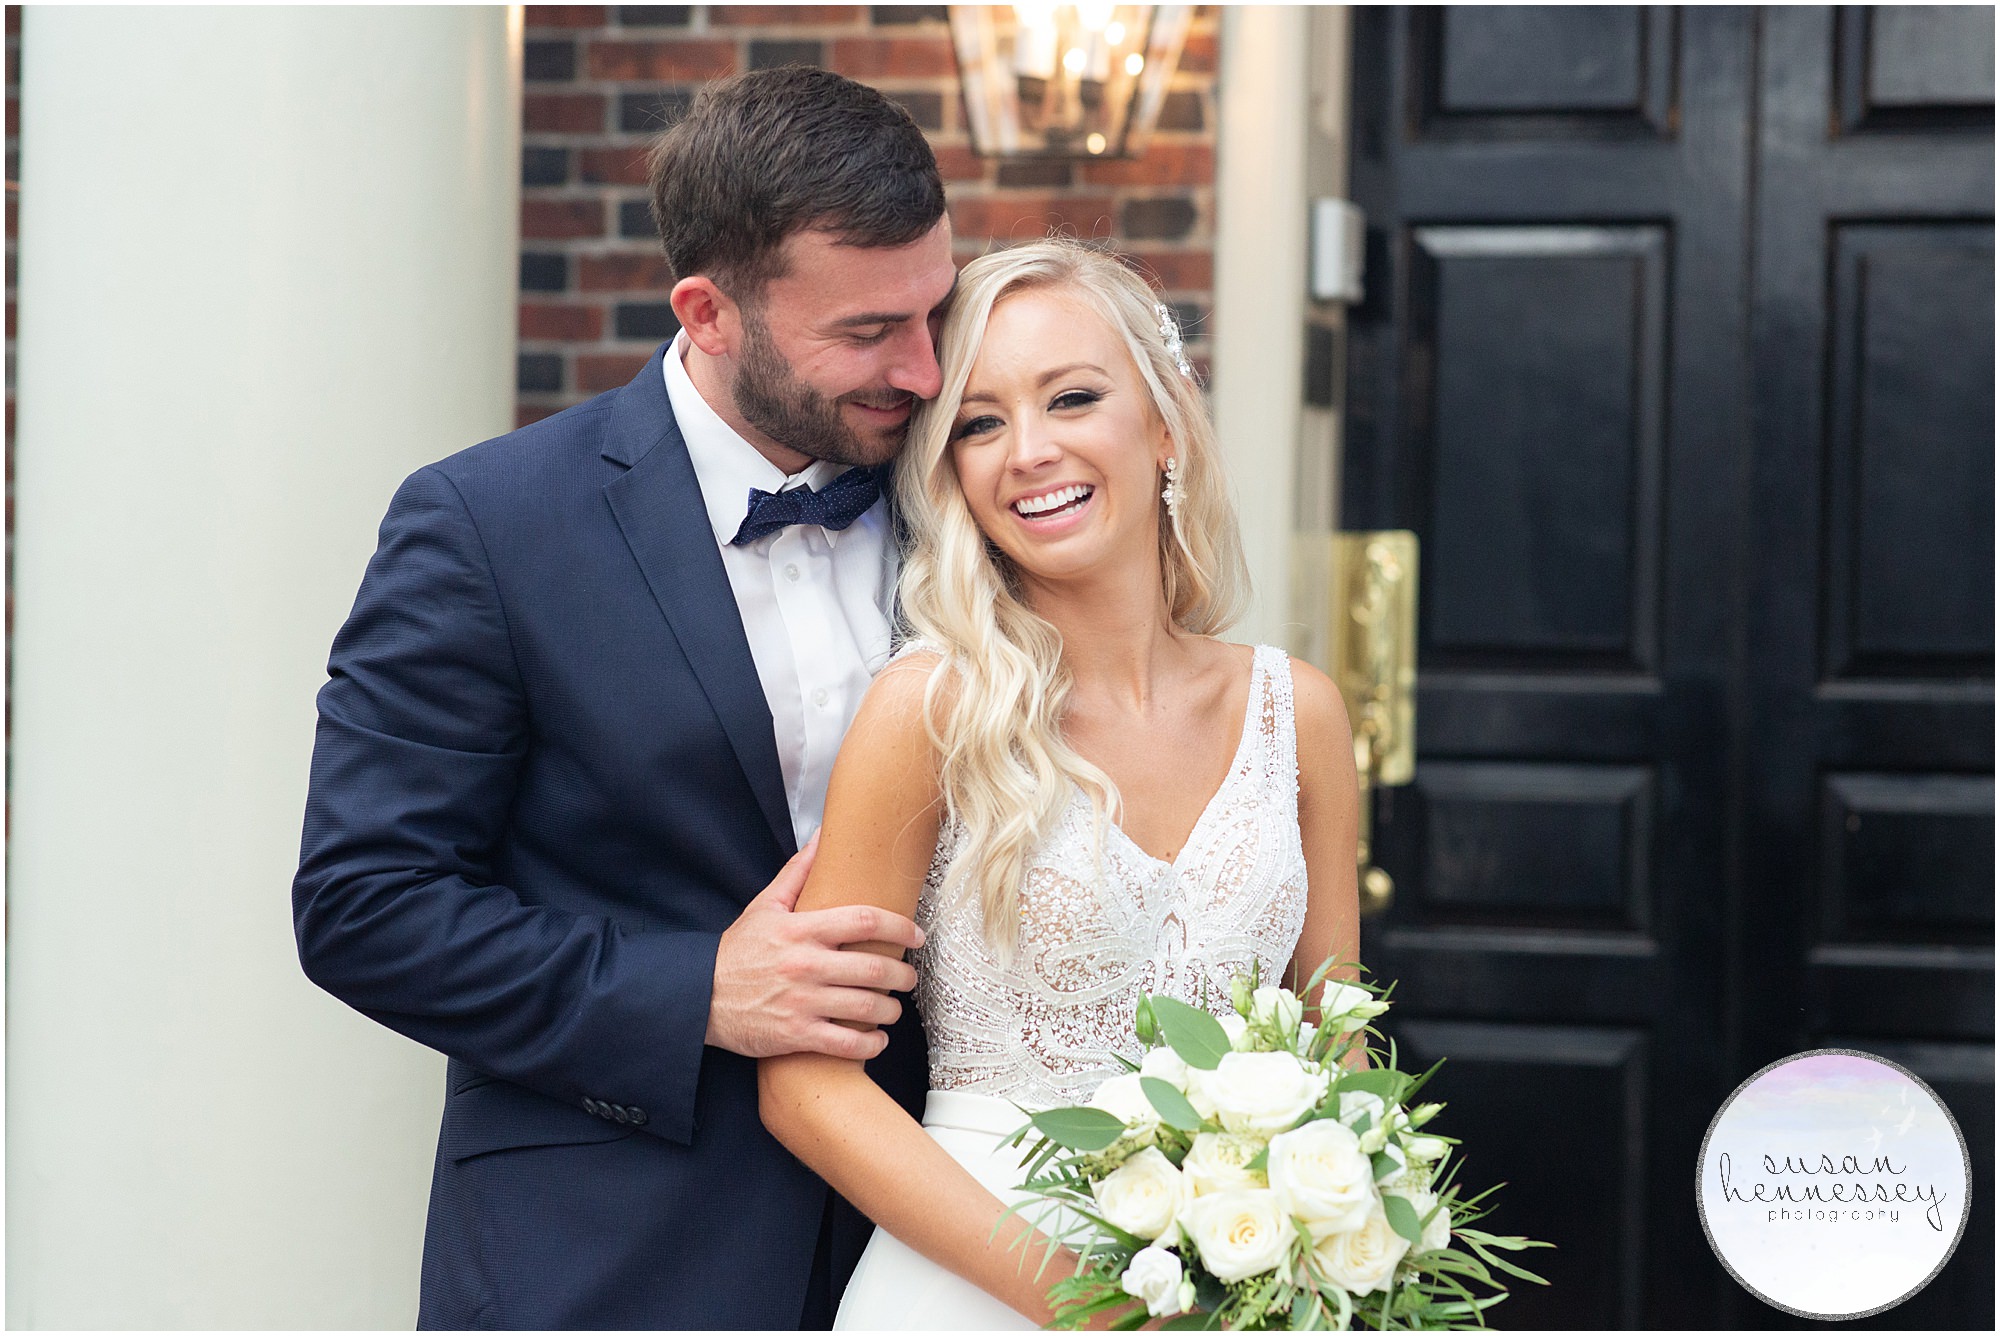 Susan Hennessey Photography Best of 2020 Weddings - Couple portraits at Philadelphia microwedding at Morris House Hotel